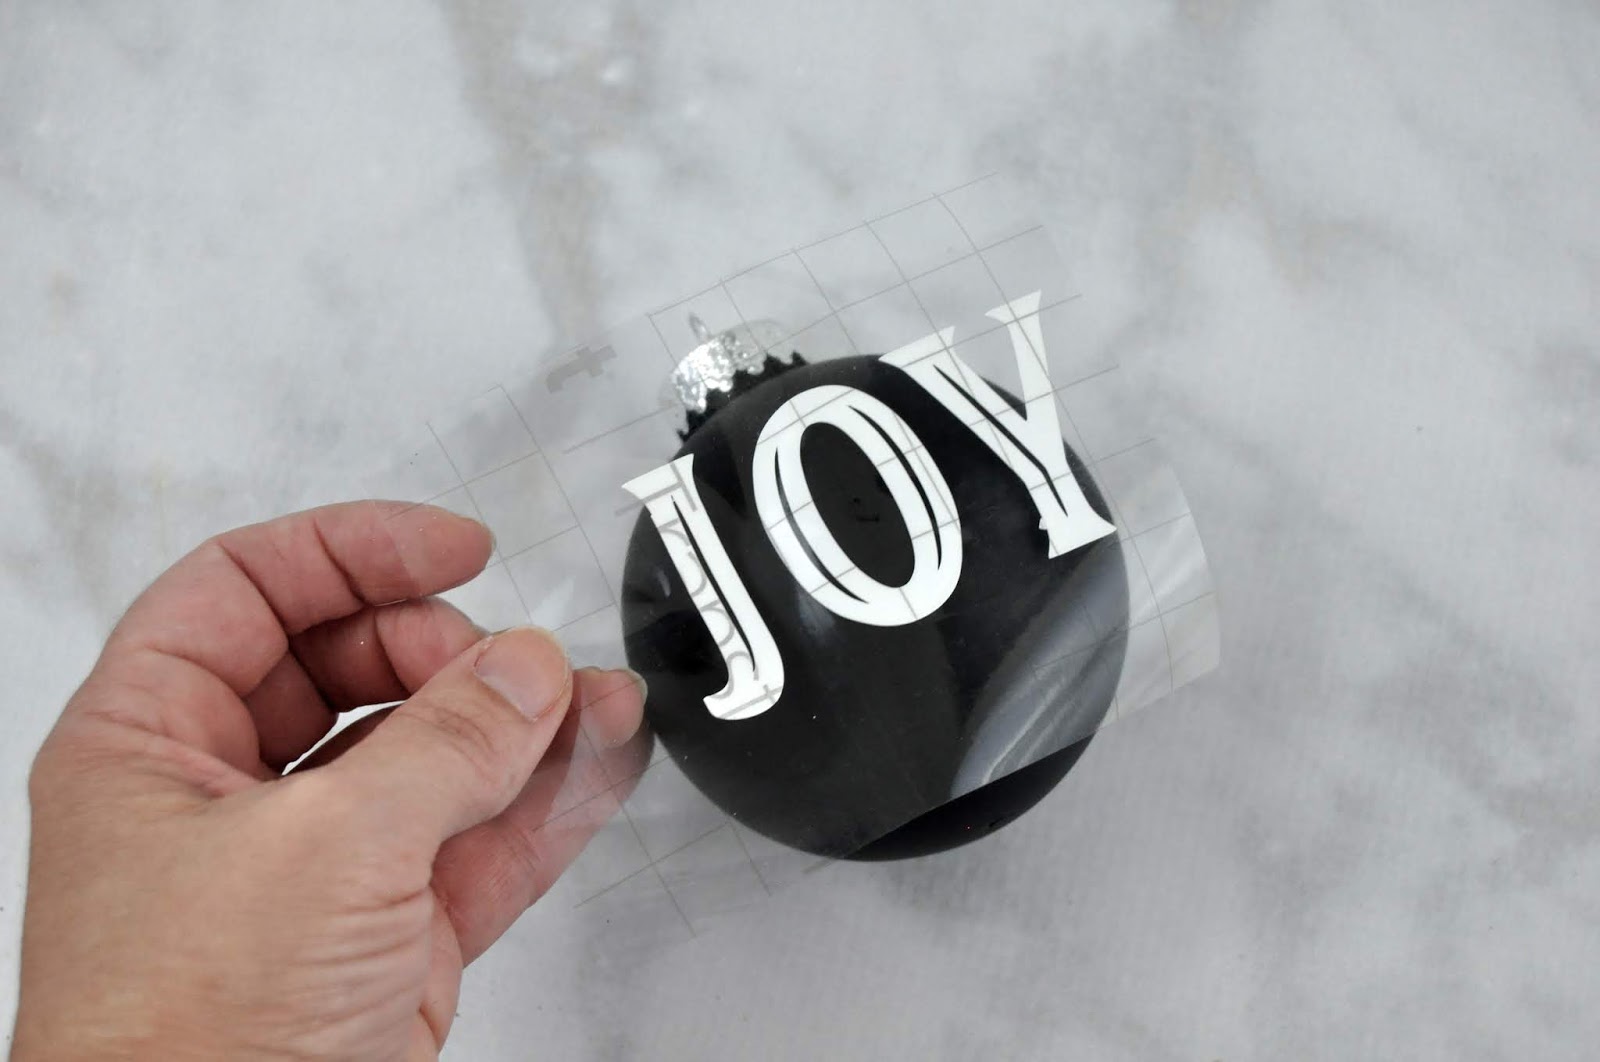 Chalkboard ornaments with white vinyl designed by Jen Gallacher using a Silhouette die cut machine. #diecutting #christmasornament #jengallacher #christmascraft